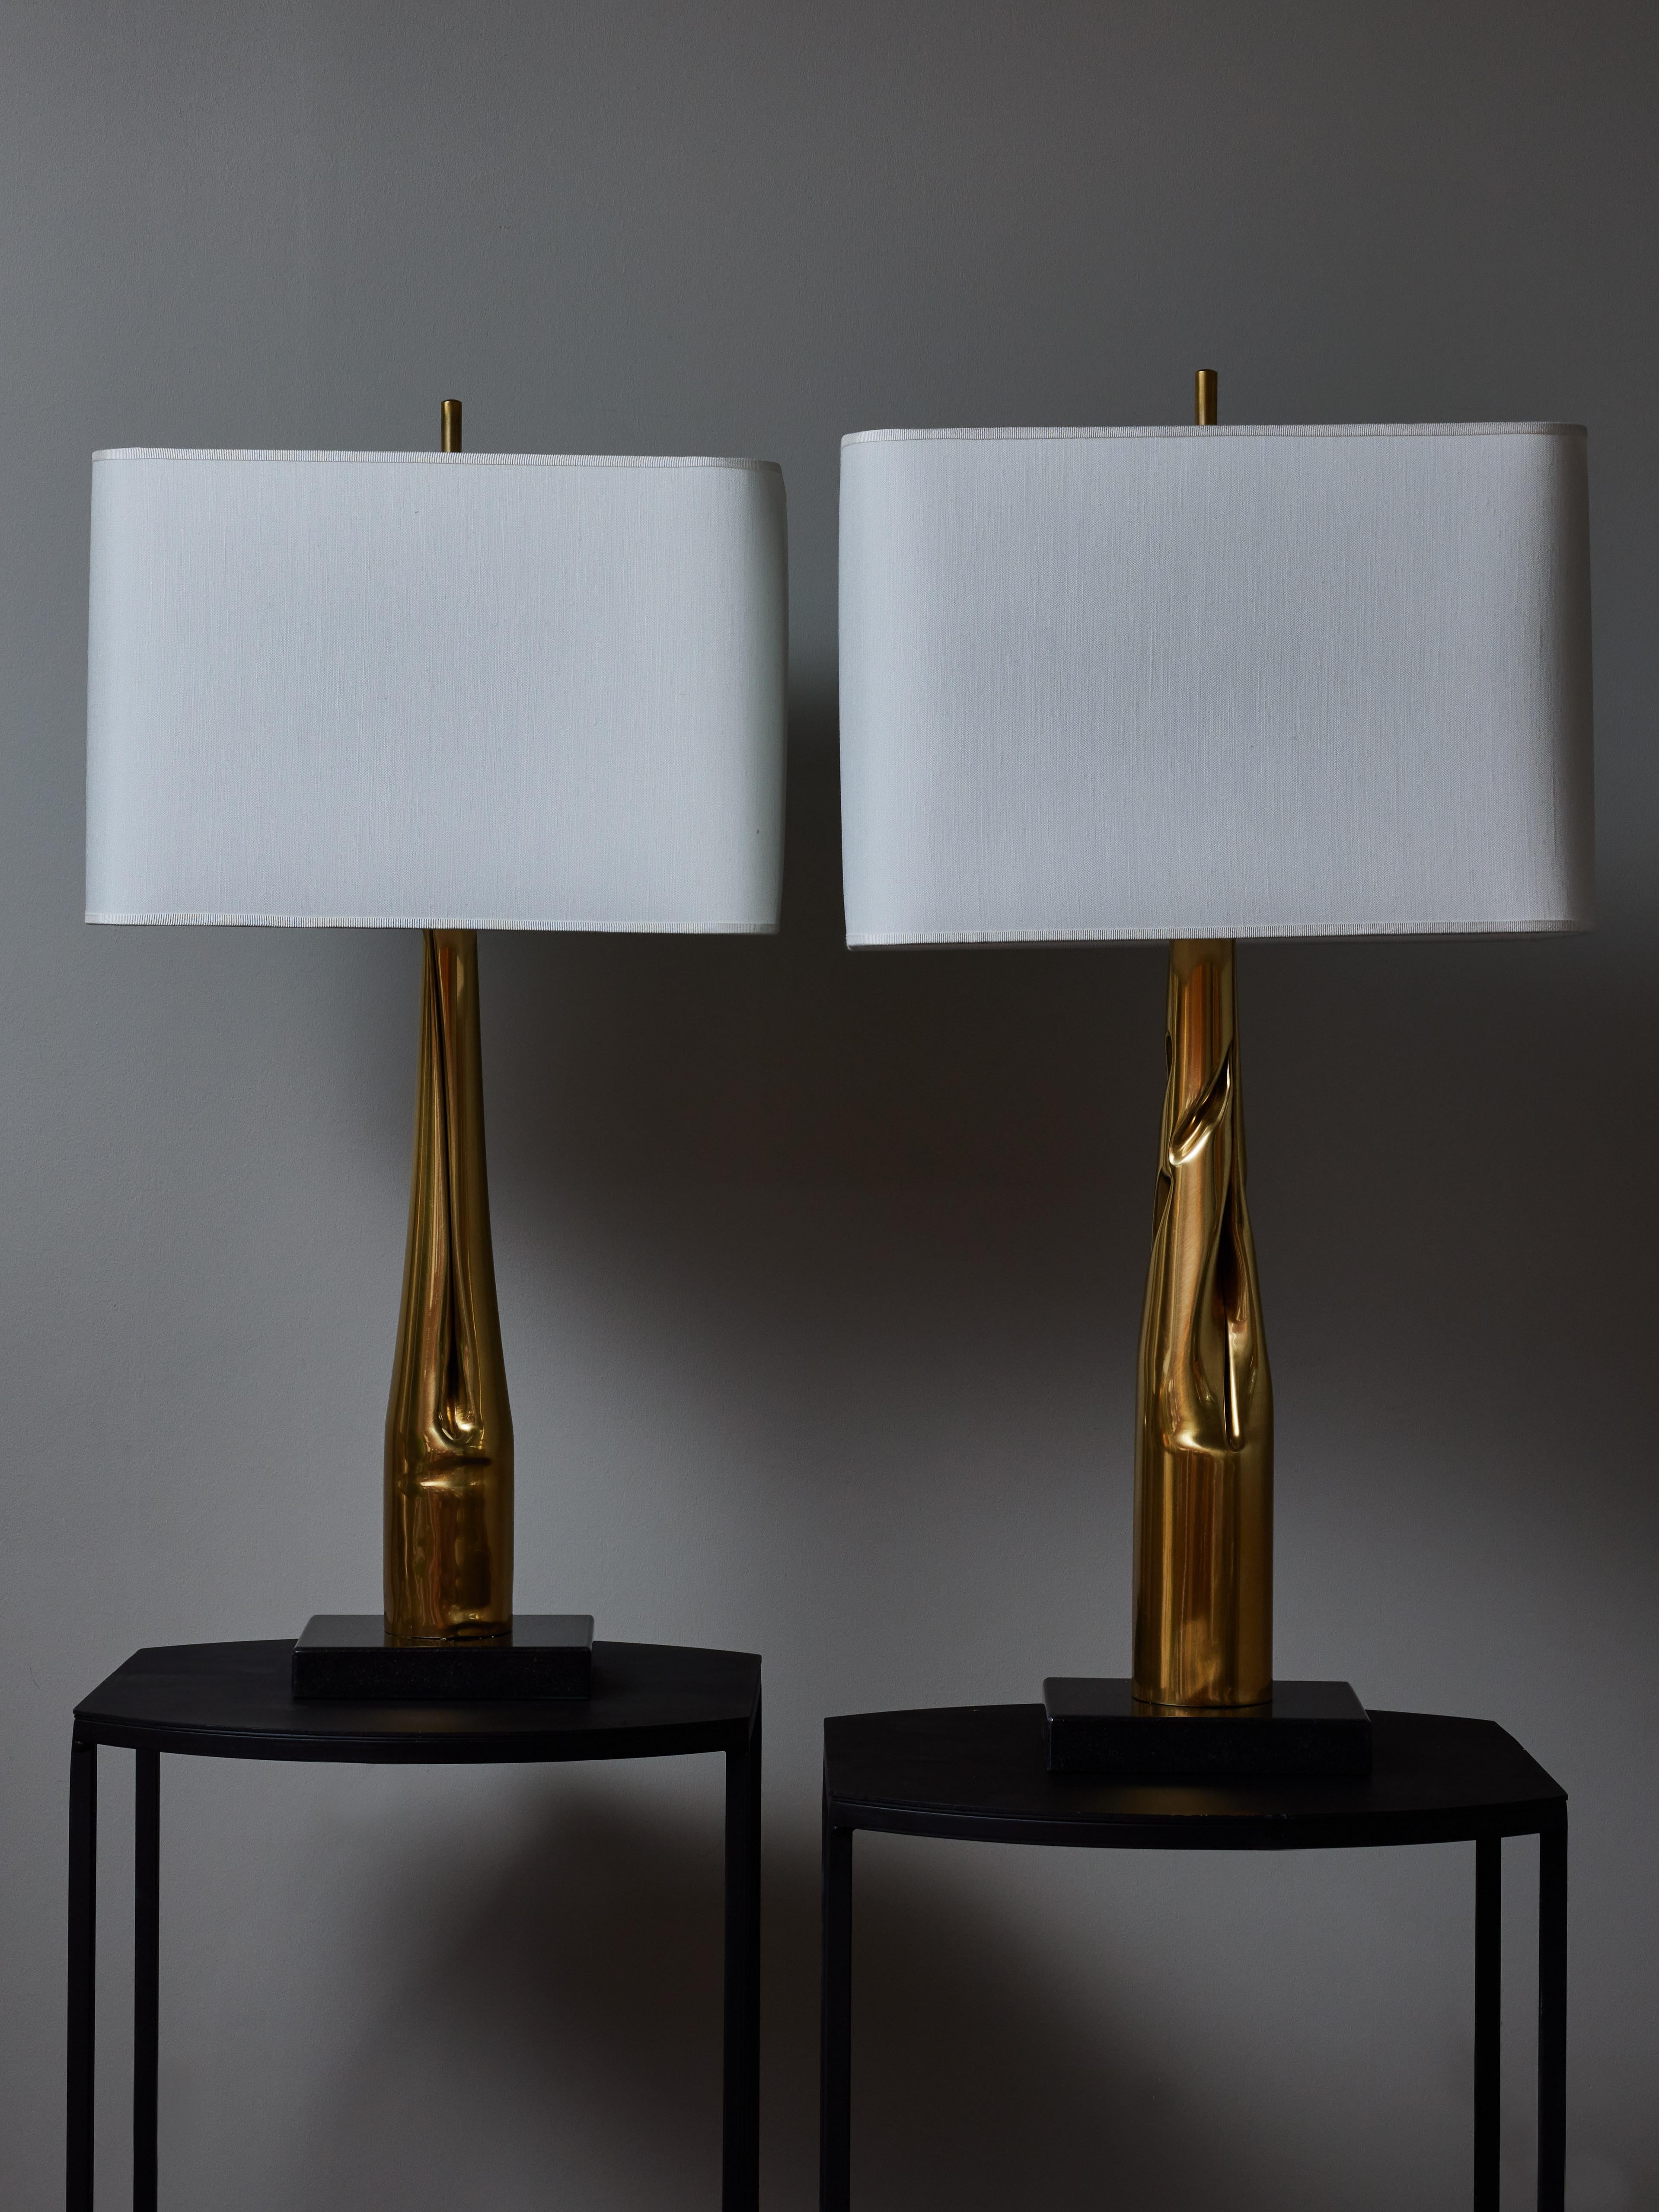 Modern Pair of Brass and Marble Table Lamps by Esperia for Glustin Luminaires For Sale